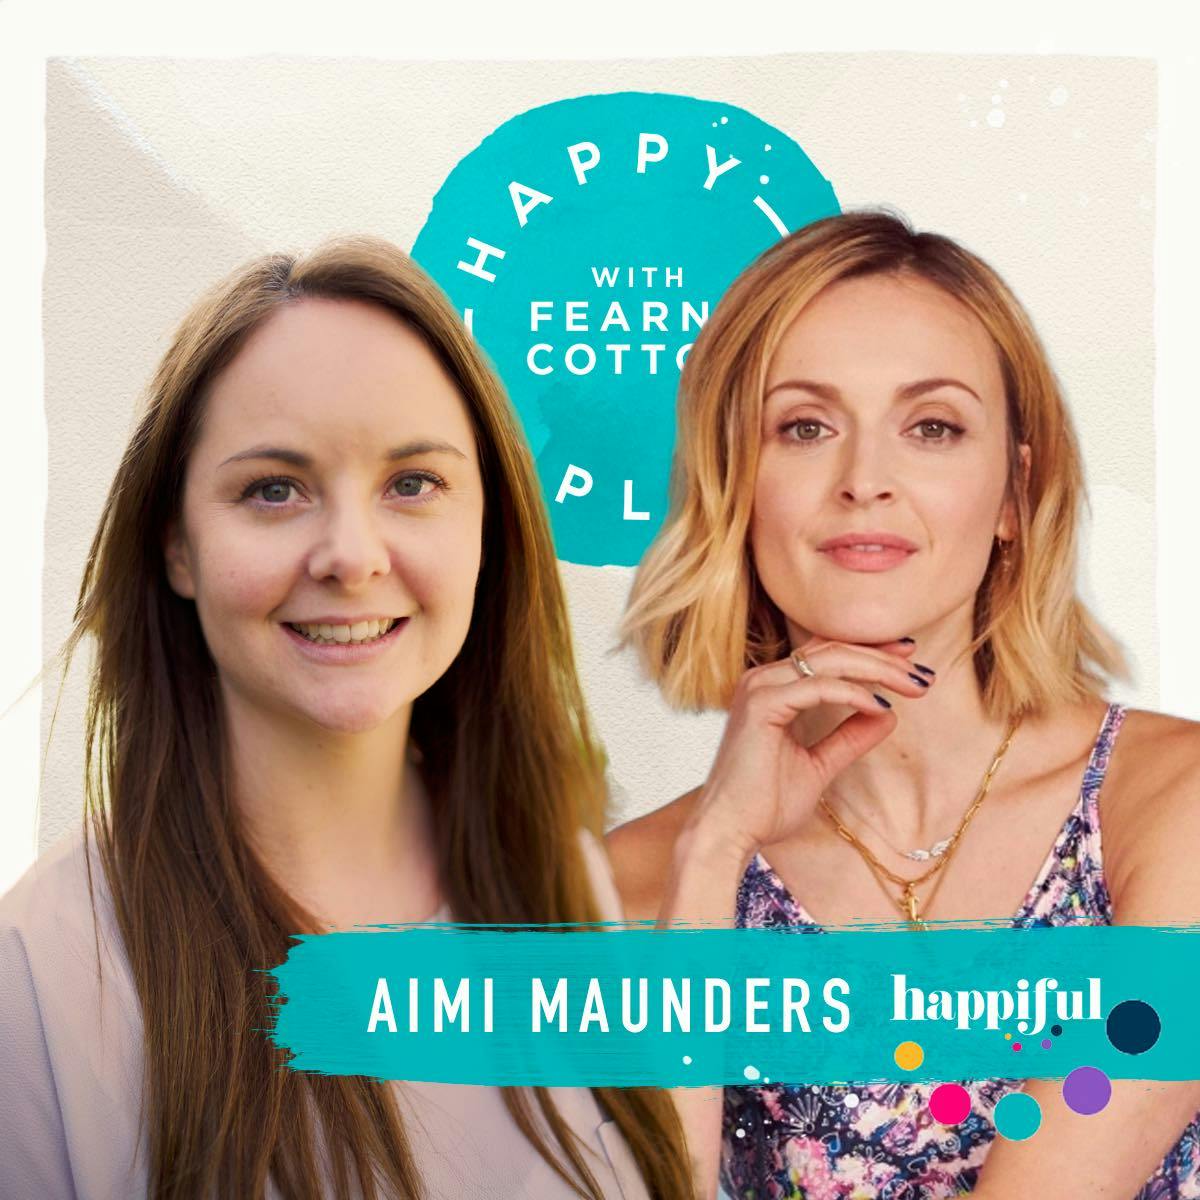 "Talking changed everything"  Happiful co-founder Aimi Maunders shares her journey on Happy Place